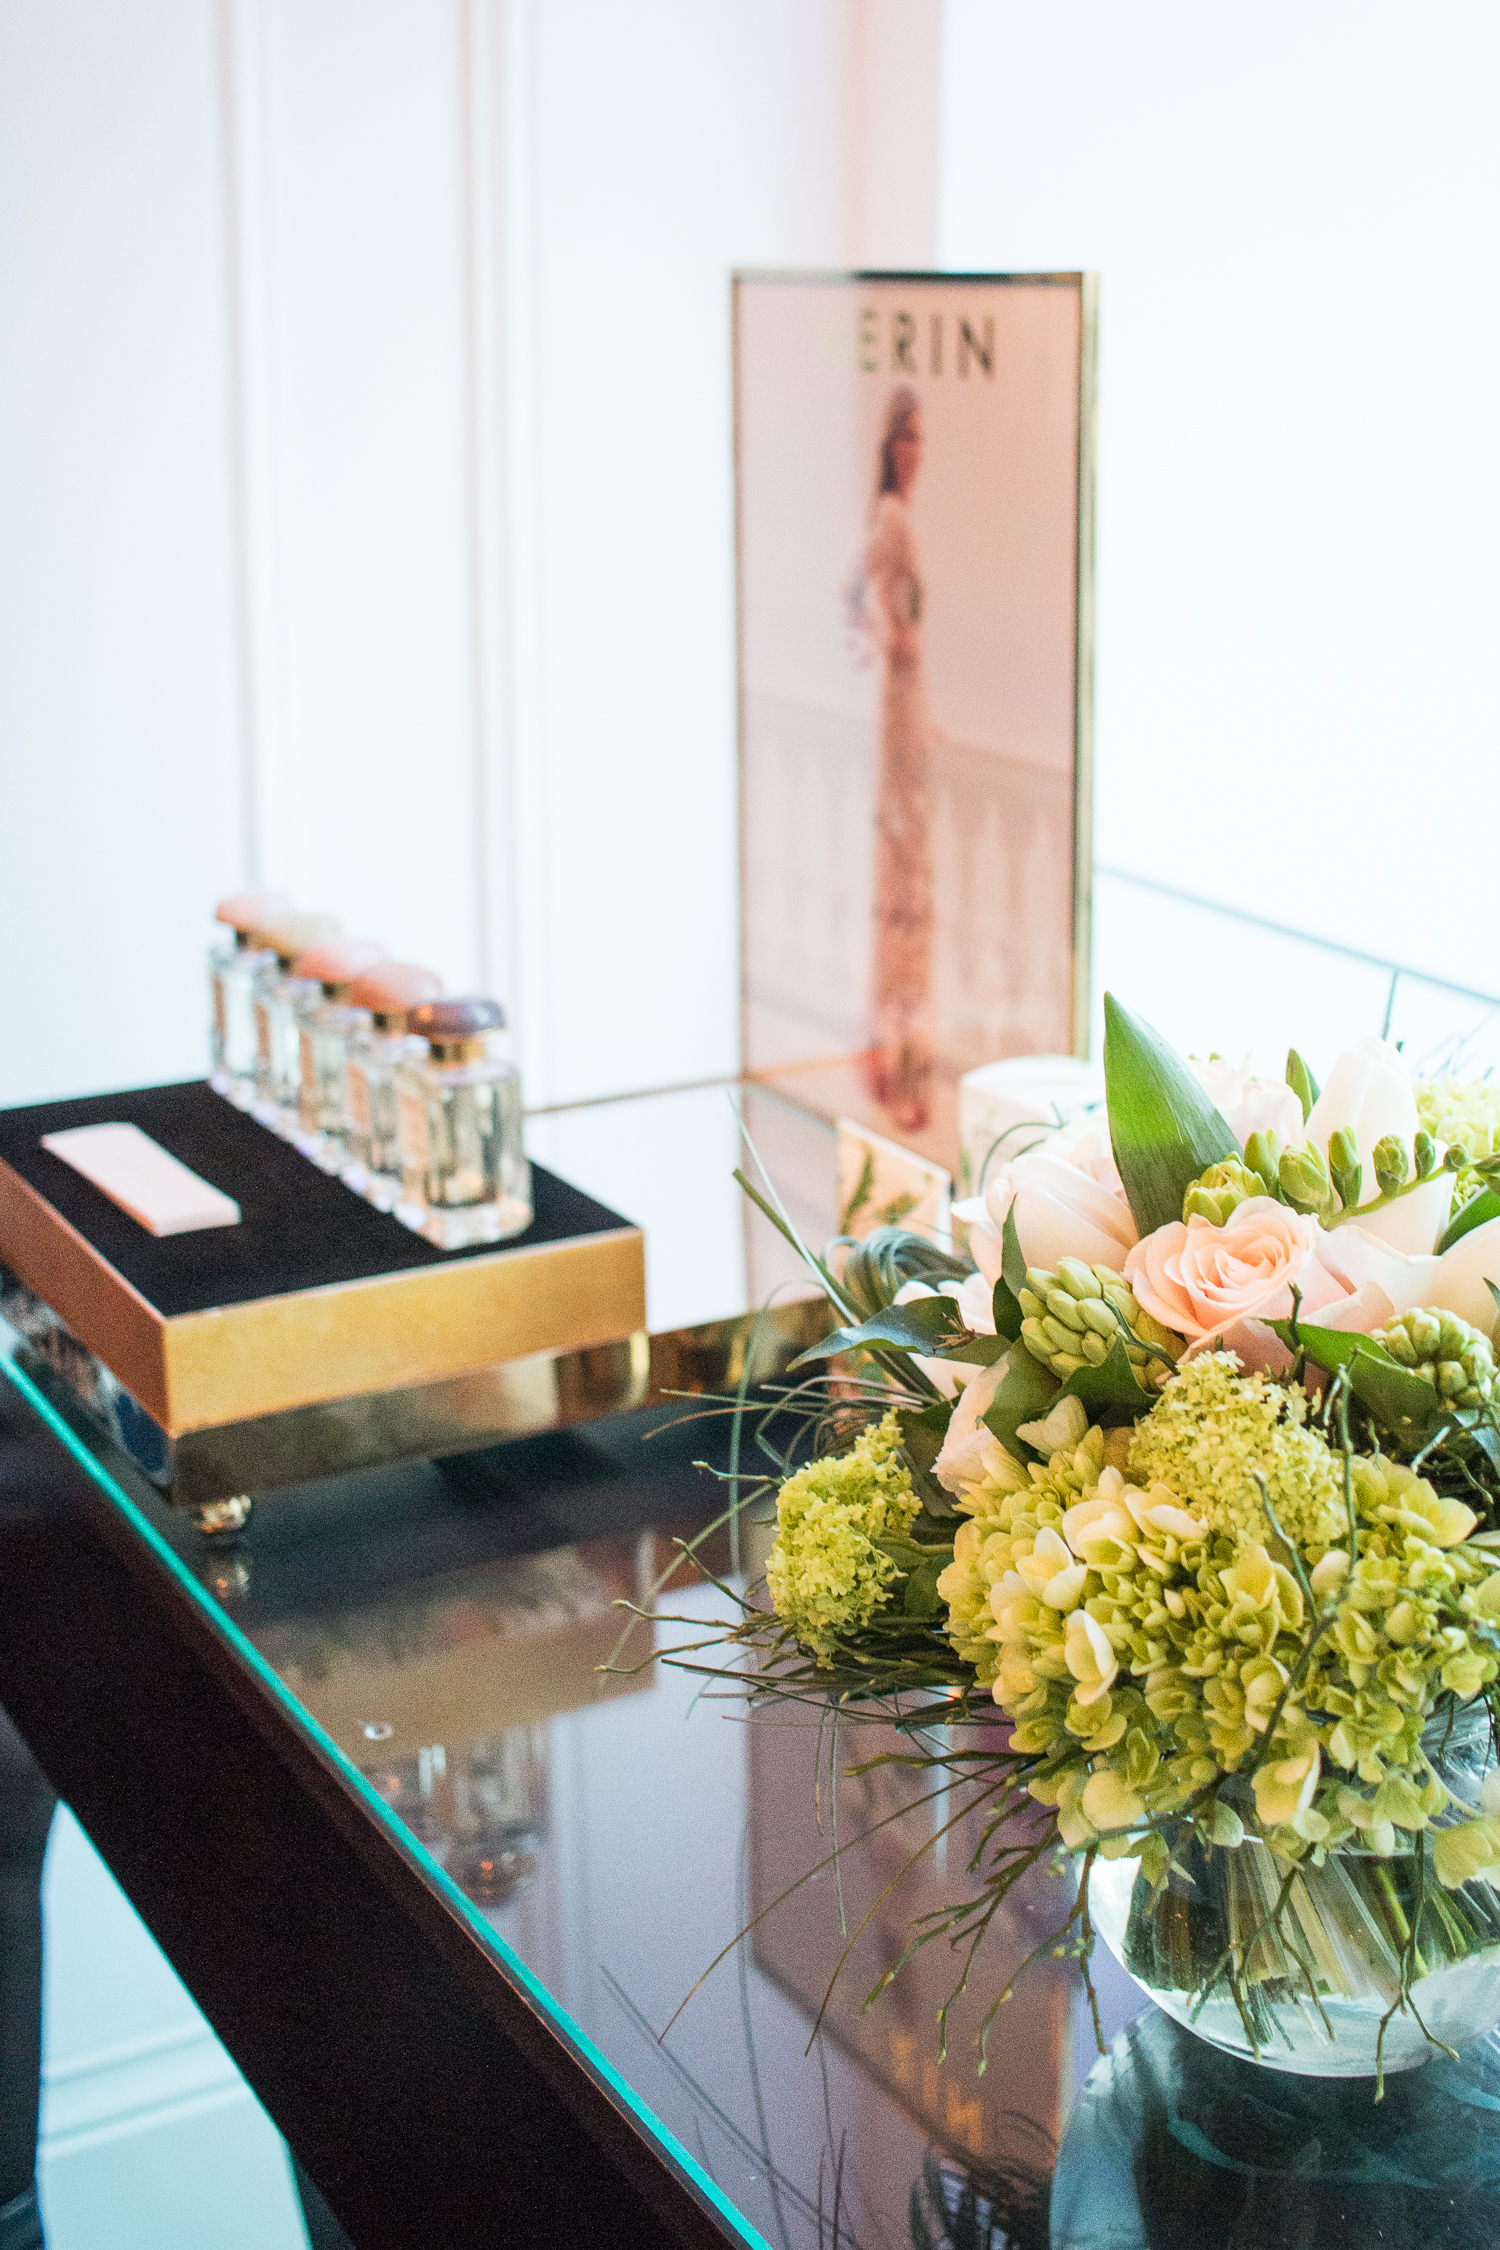 Beauty News: AERIN Afternoon Tea | Love Daily Dose